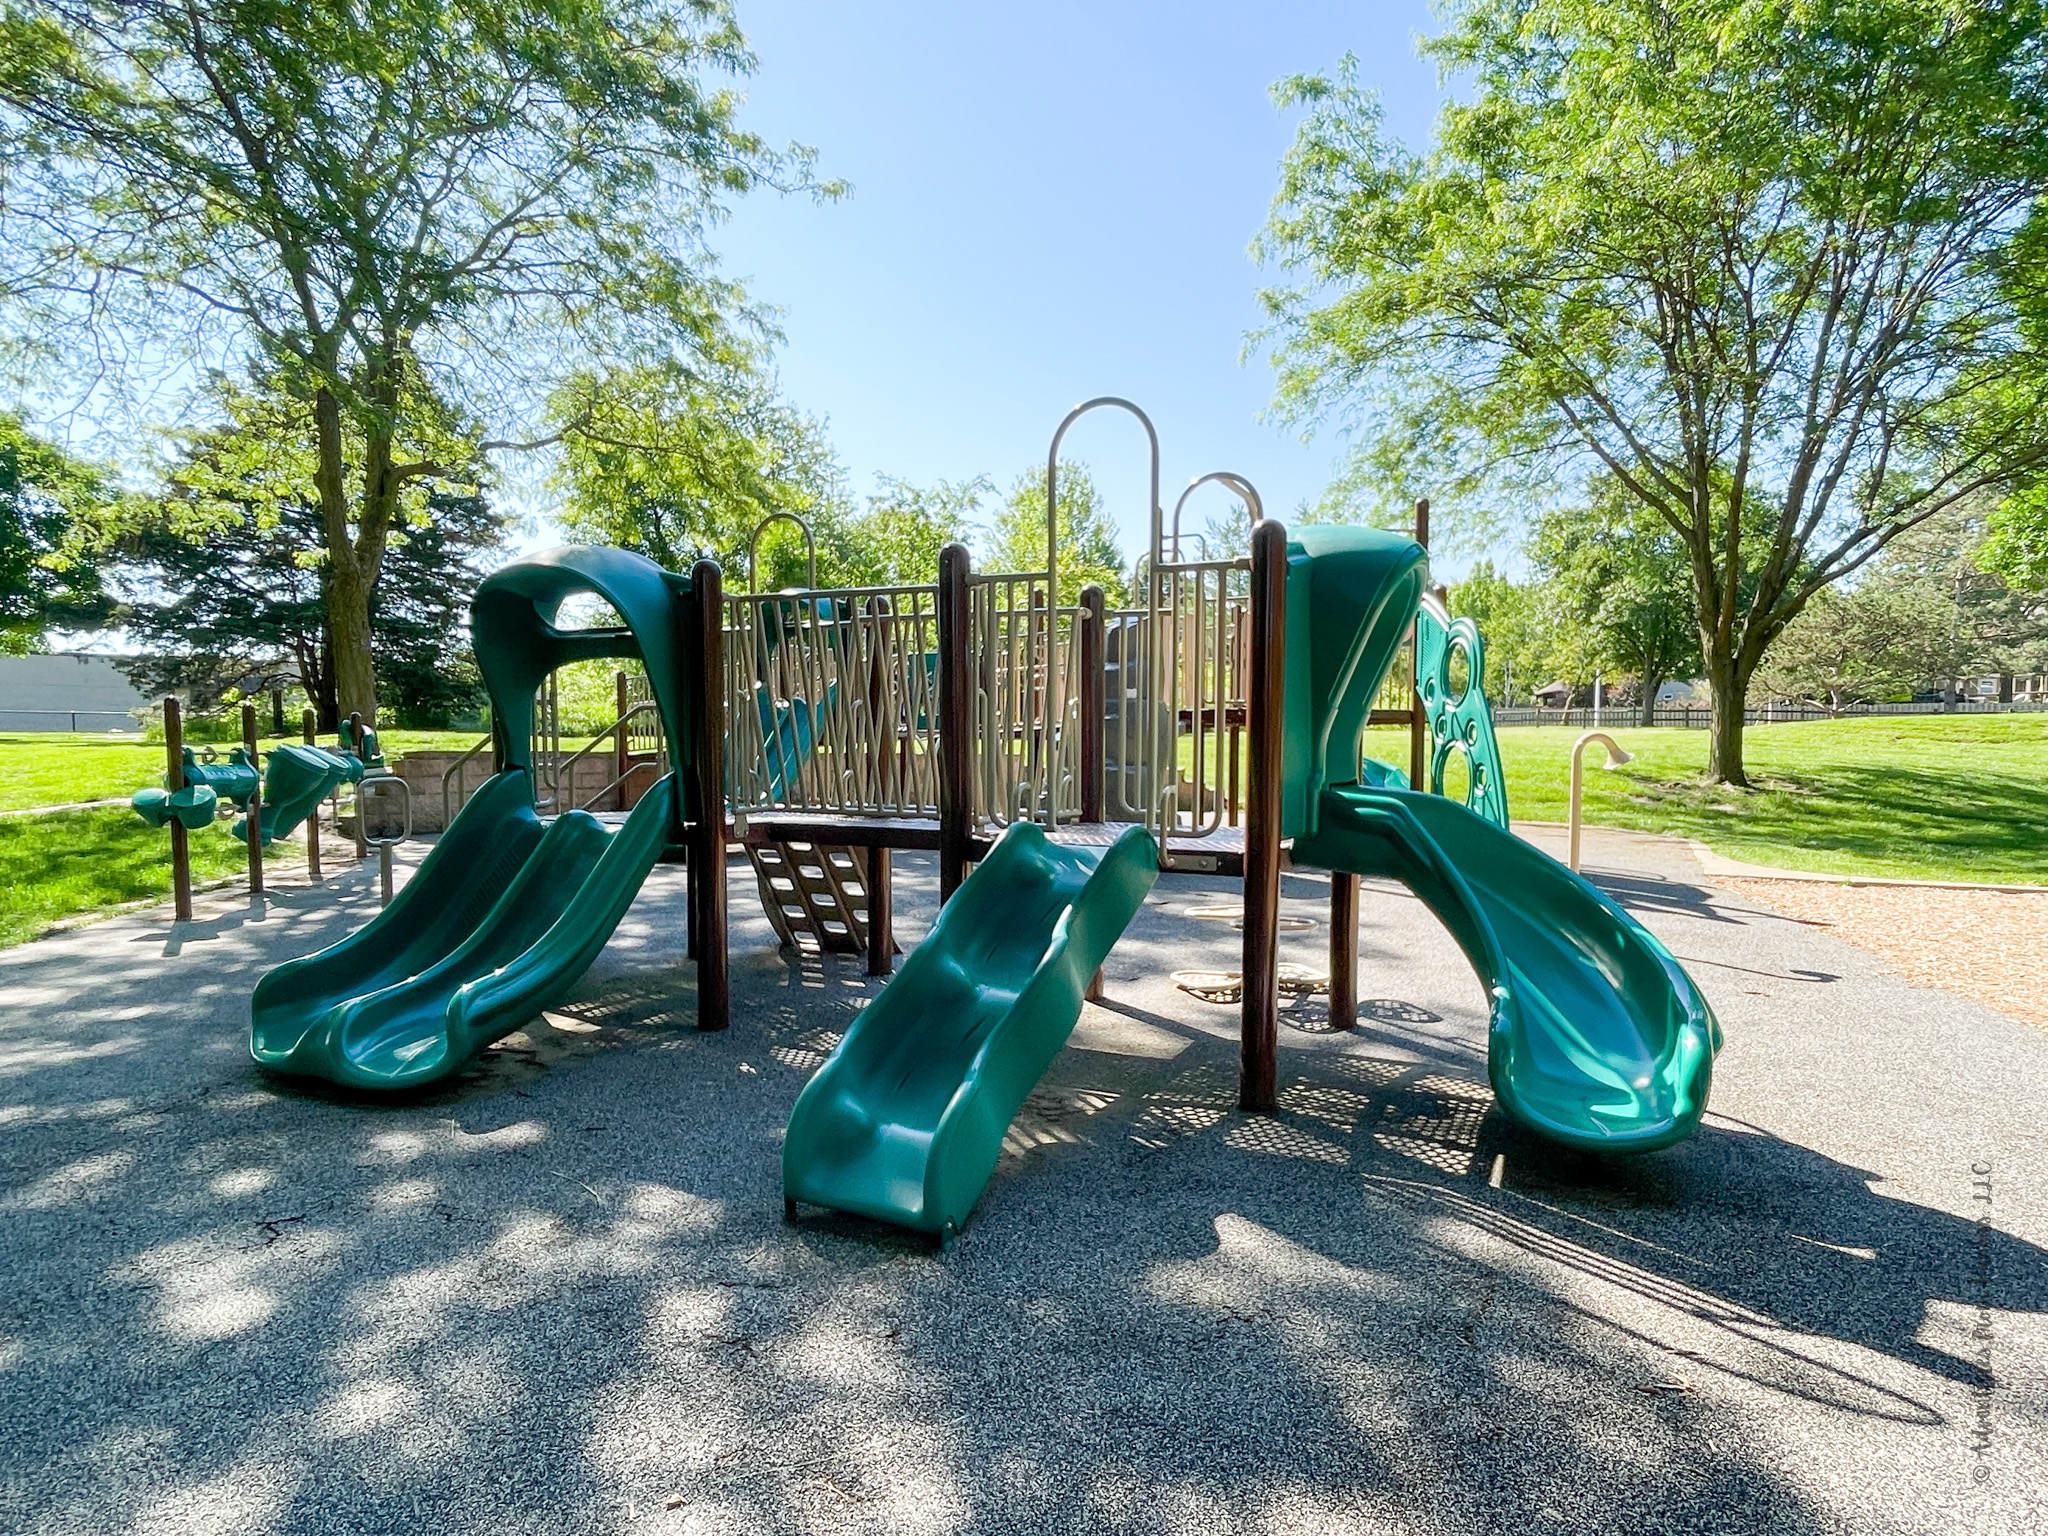 Ad Astra Little Playground Slides and climbers